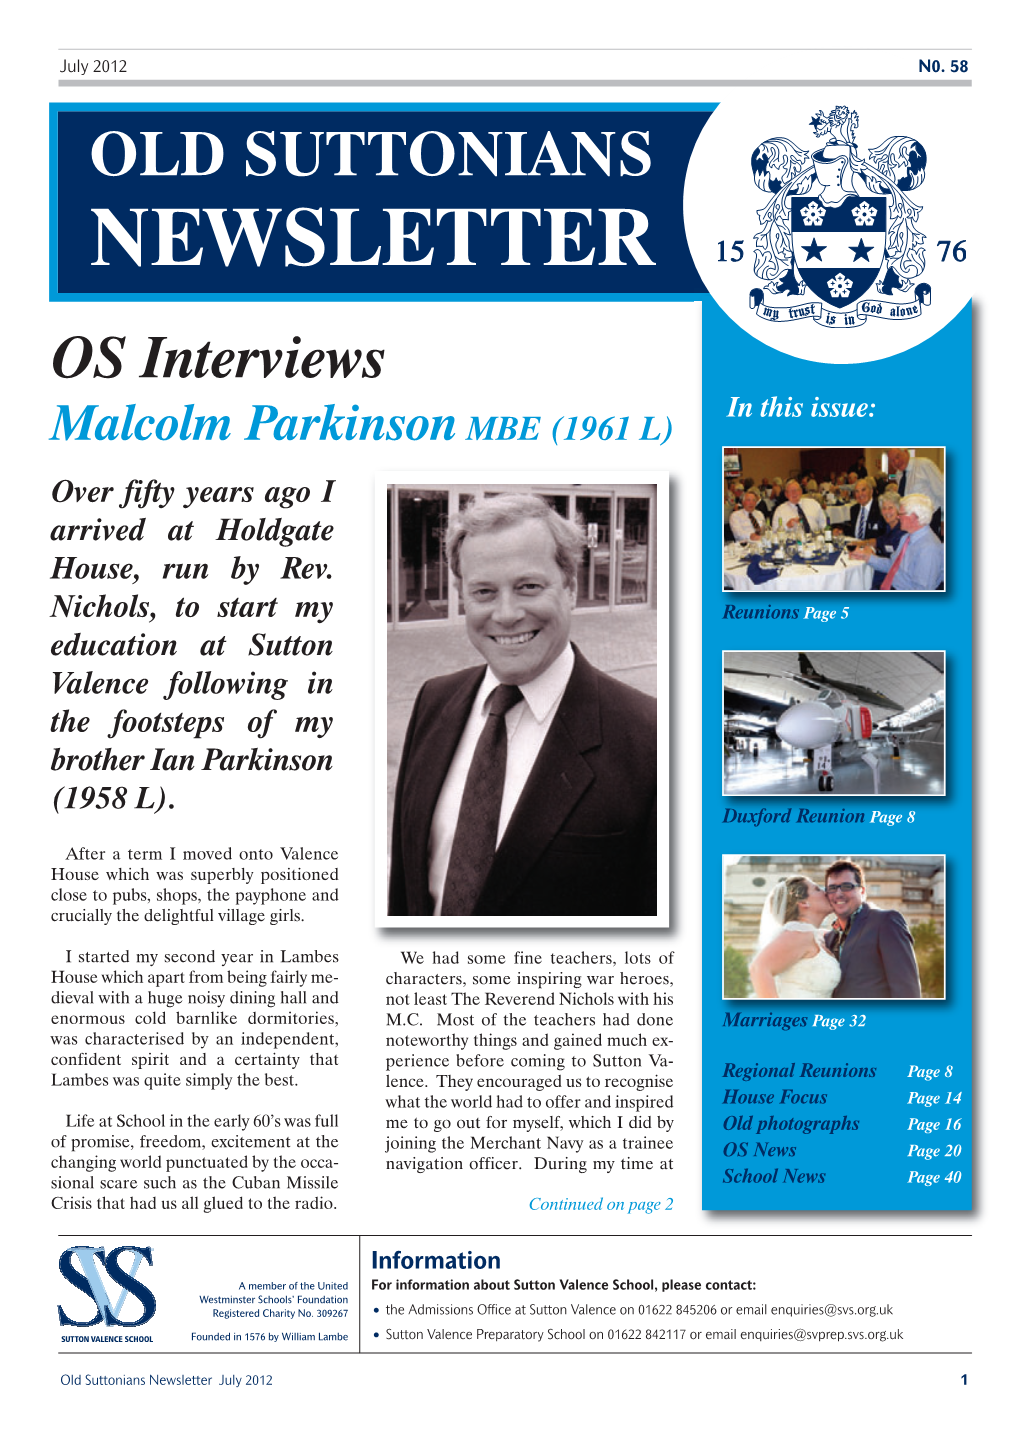 OLD SUTTONIANS NEWSLETTER OS Interviews in This Issue: Malcolm Parkinson MBE (1961 L) Over Fifty Years Ago I Arrived at Holdgate House, Run by Rev